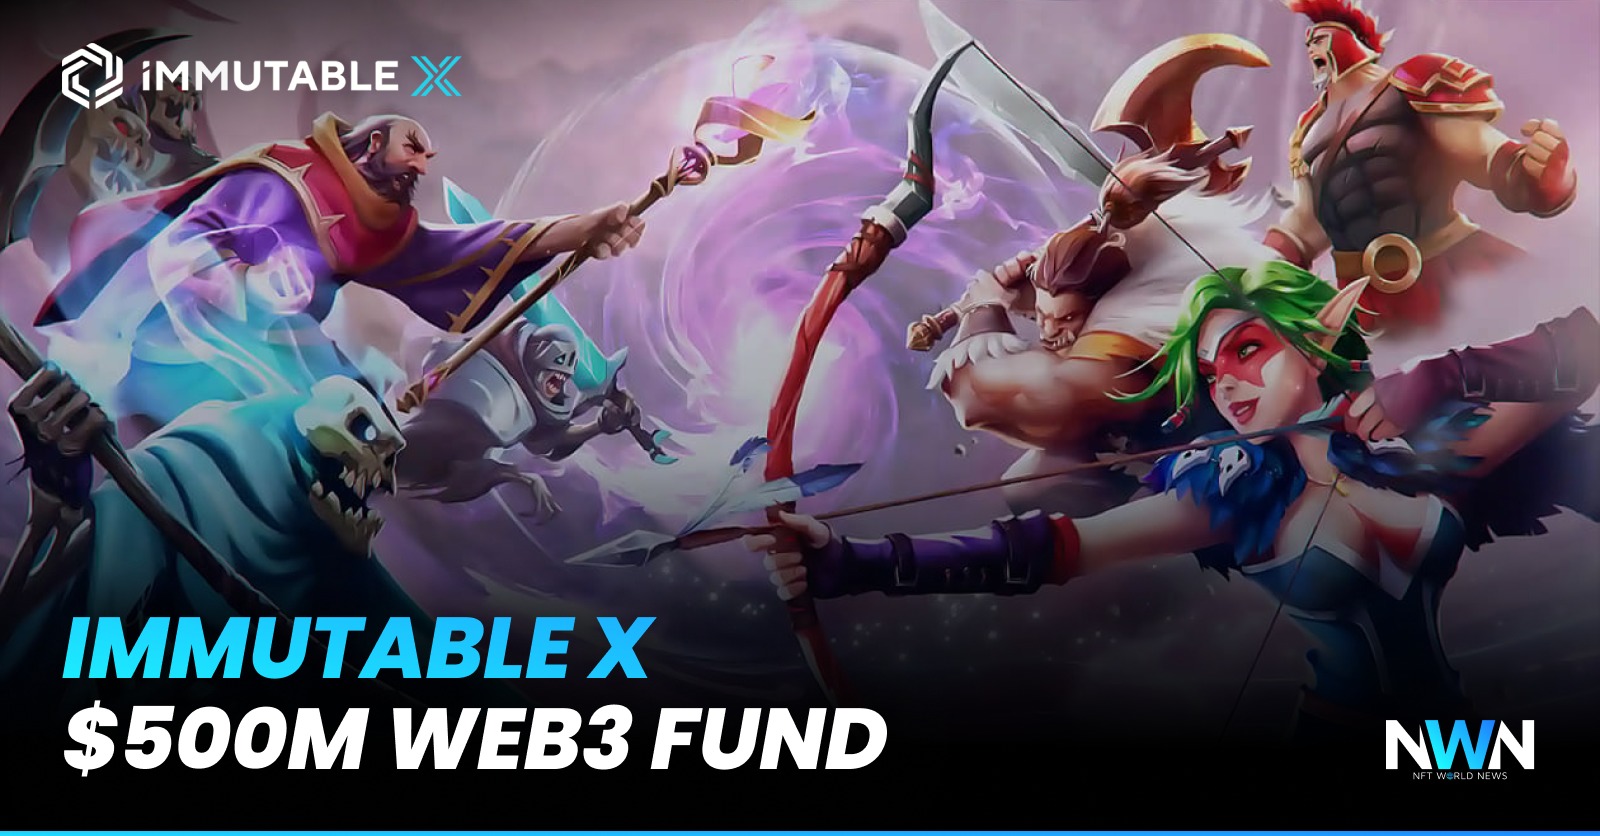 Immutable X Unveils $500 Million Fund For Web 3 And NFT Gaming